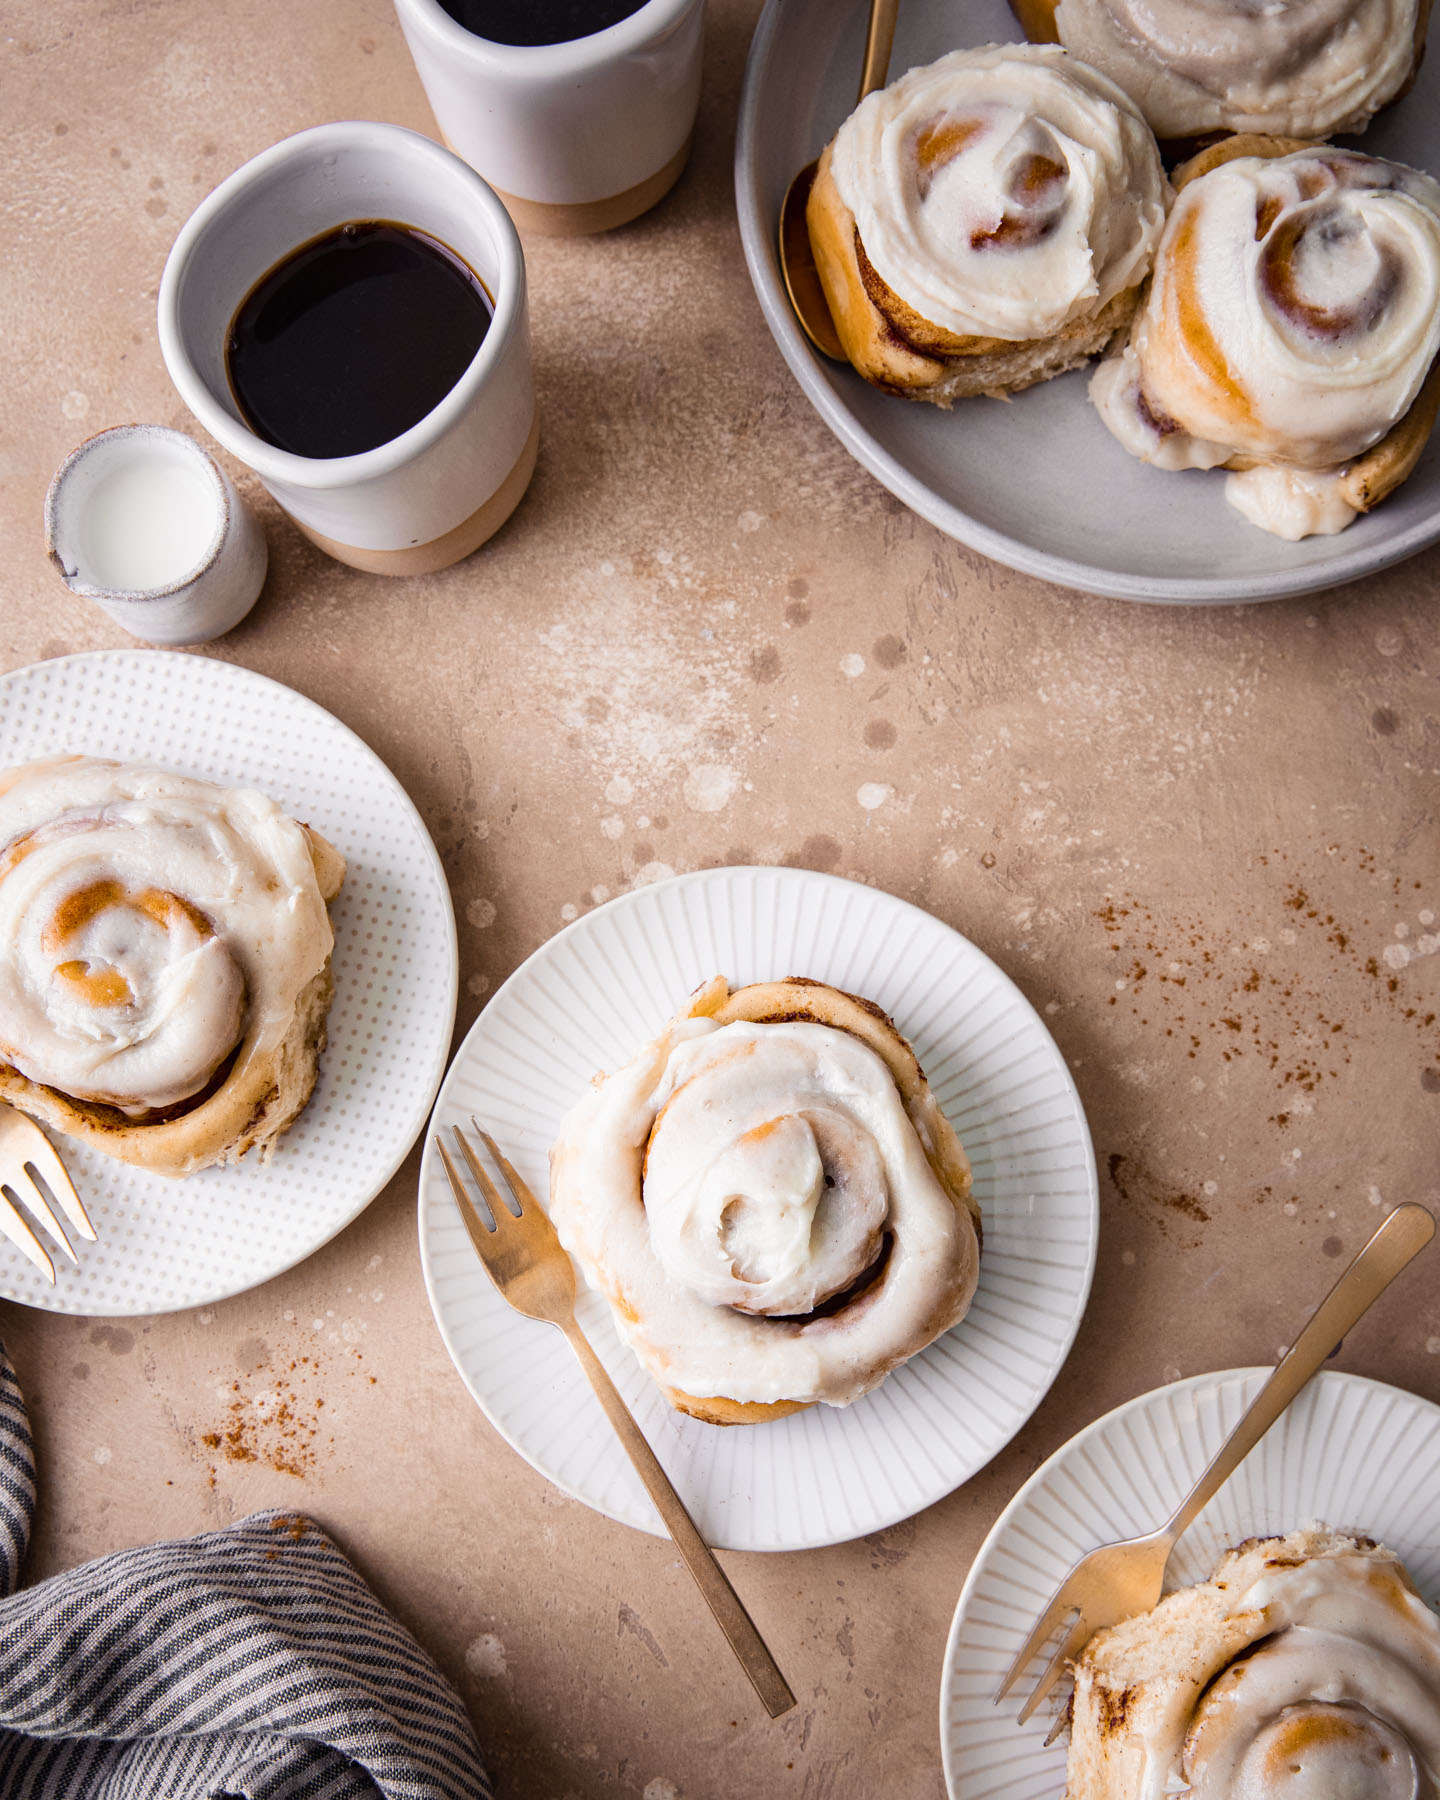 Iced cinnamon rolls on plates served with coffee